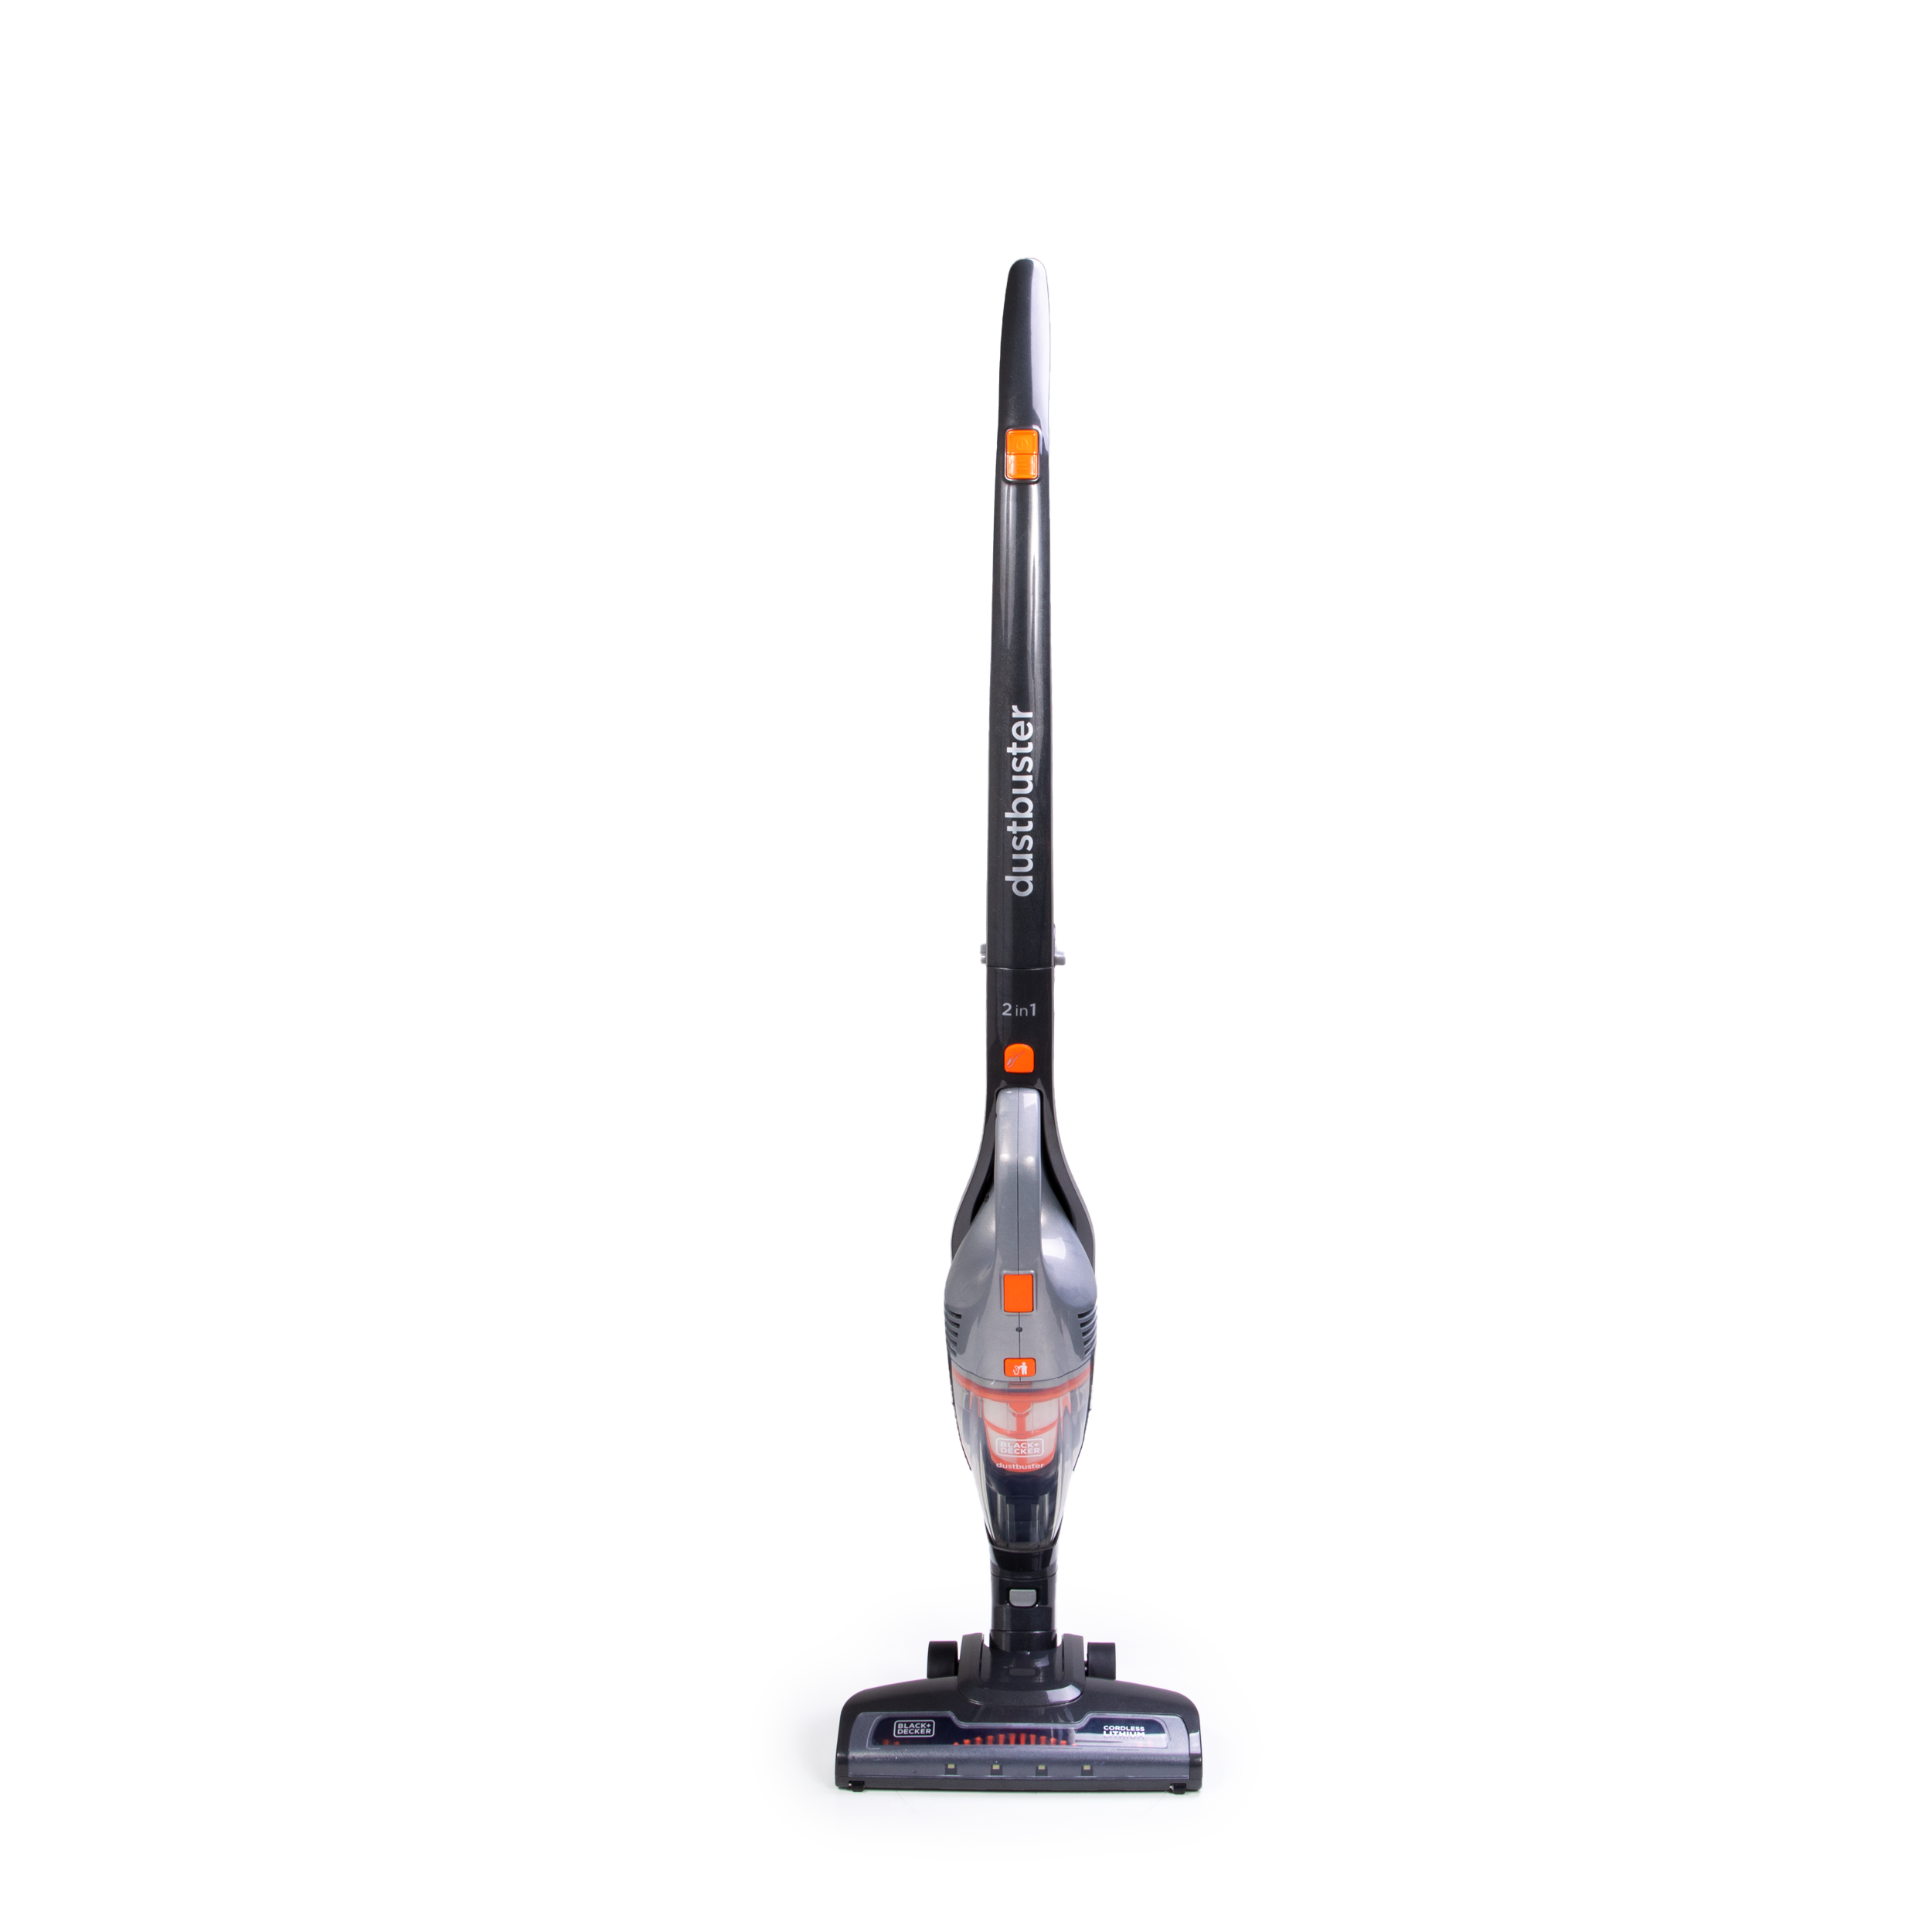 Black and Decker 3 in 1 Convertible Corded Upright Handheld Vacuum Cleaner  Gray for sale online